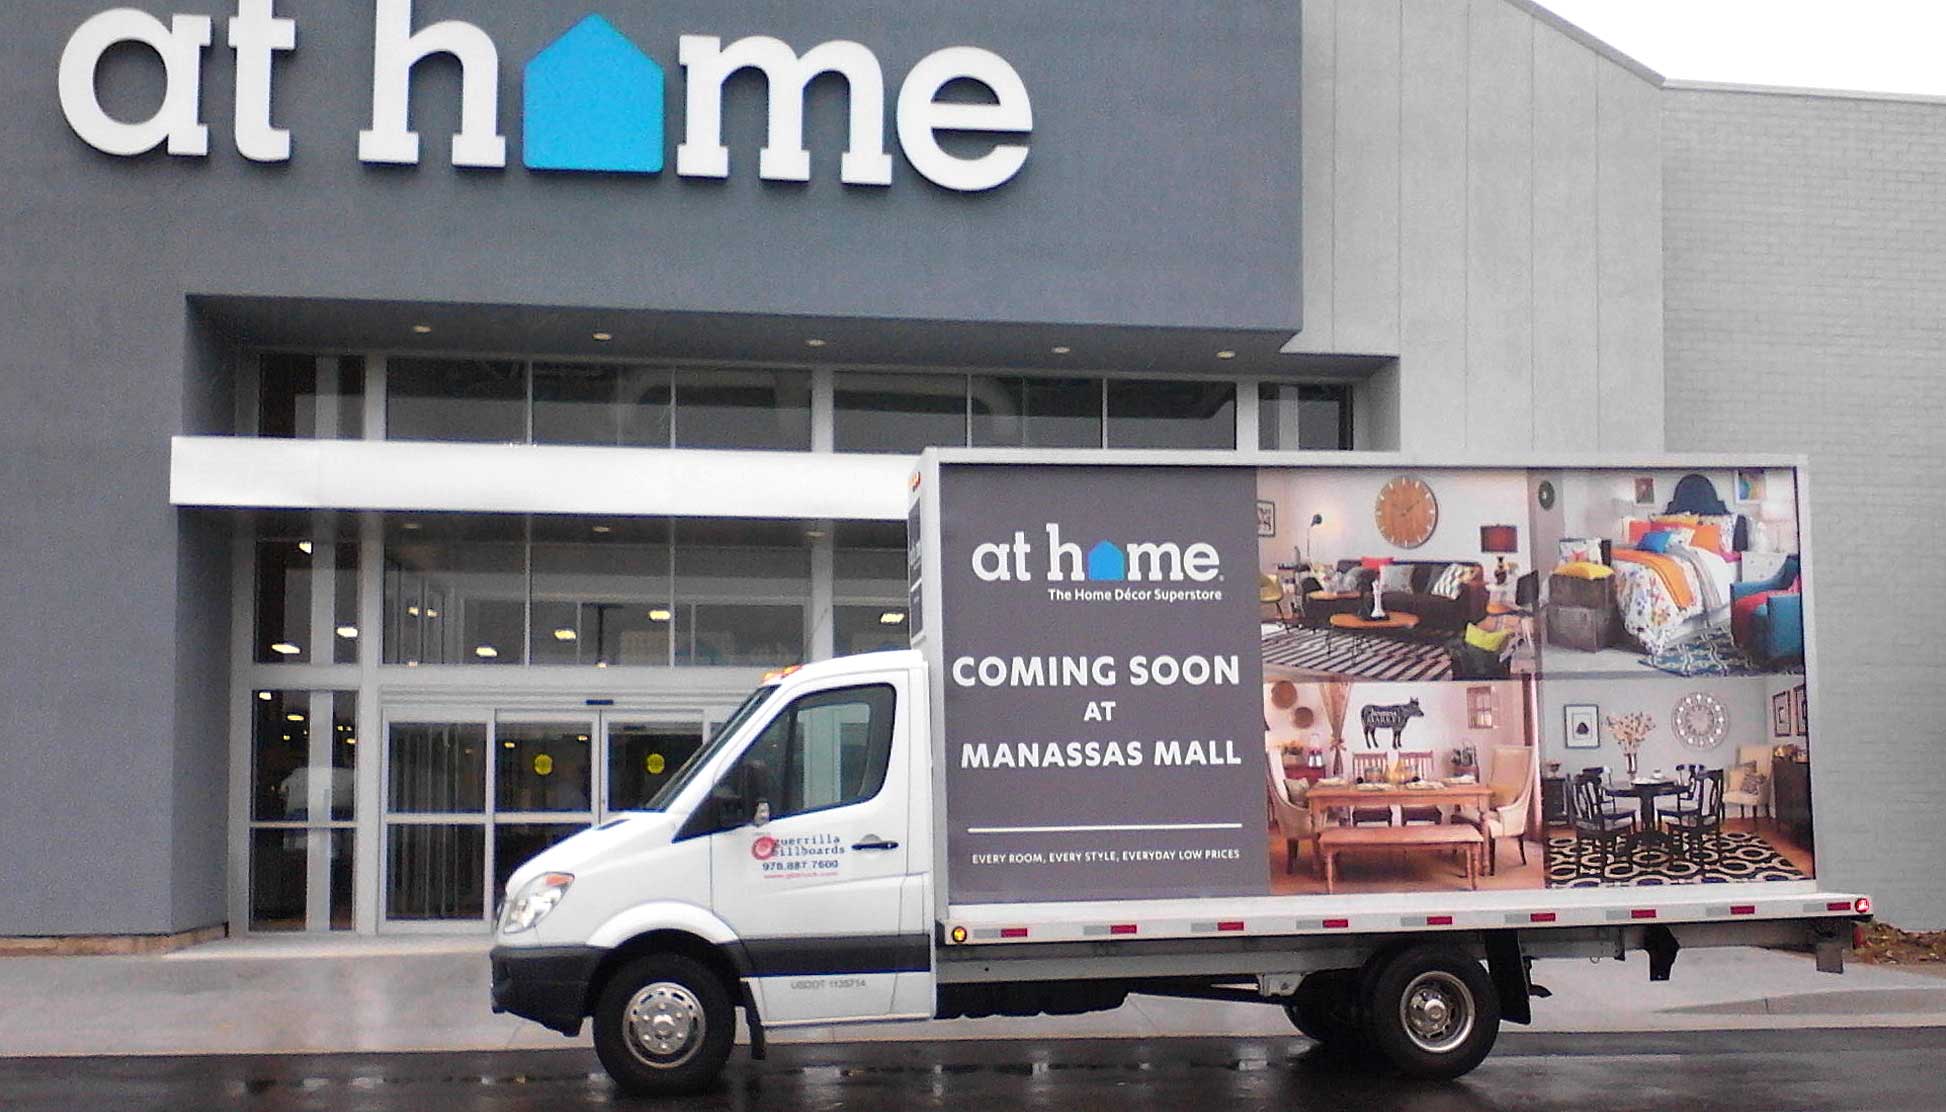 Billboard truck promotion the soon to open At Home store in Manassas VA